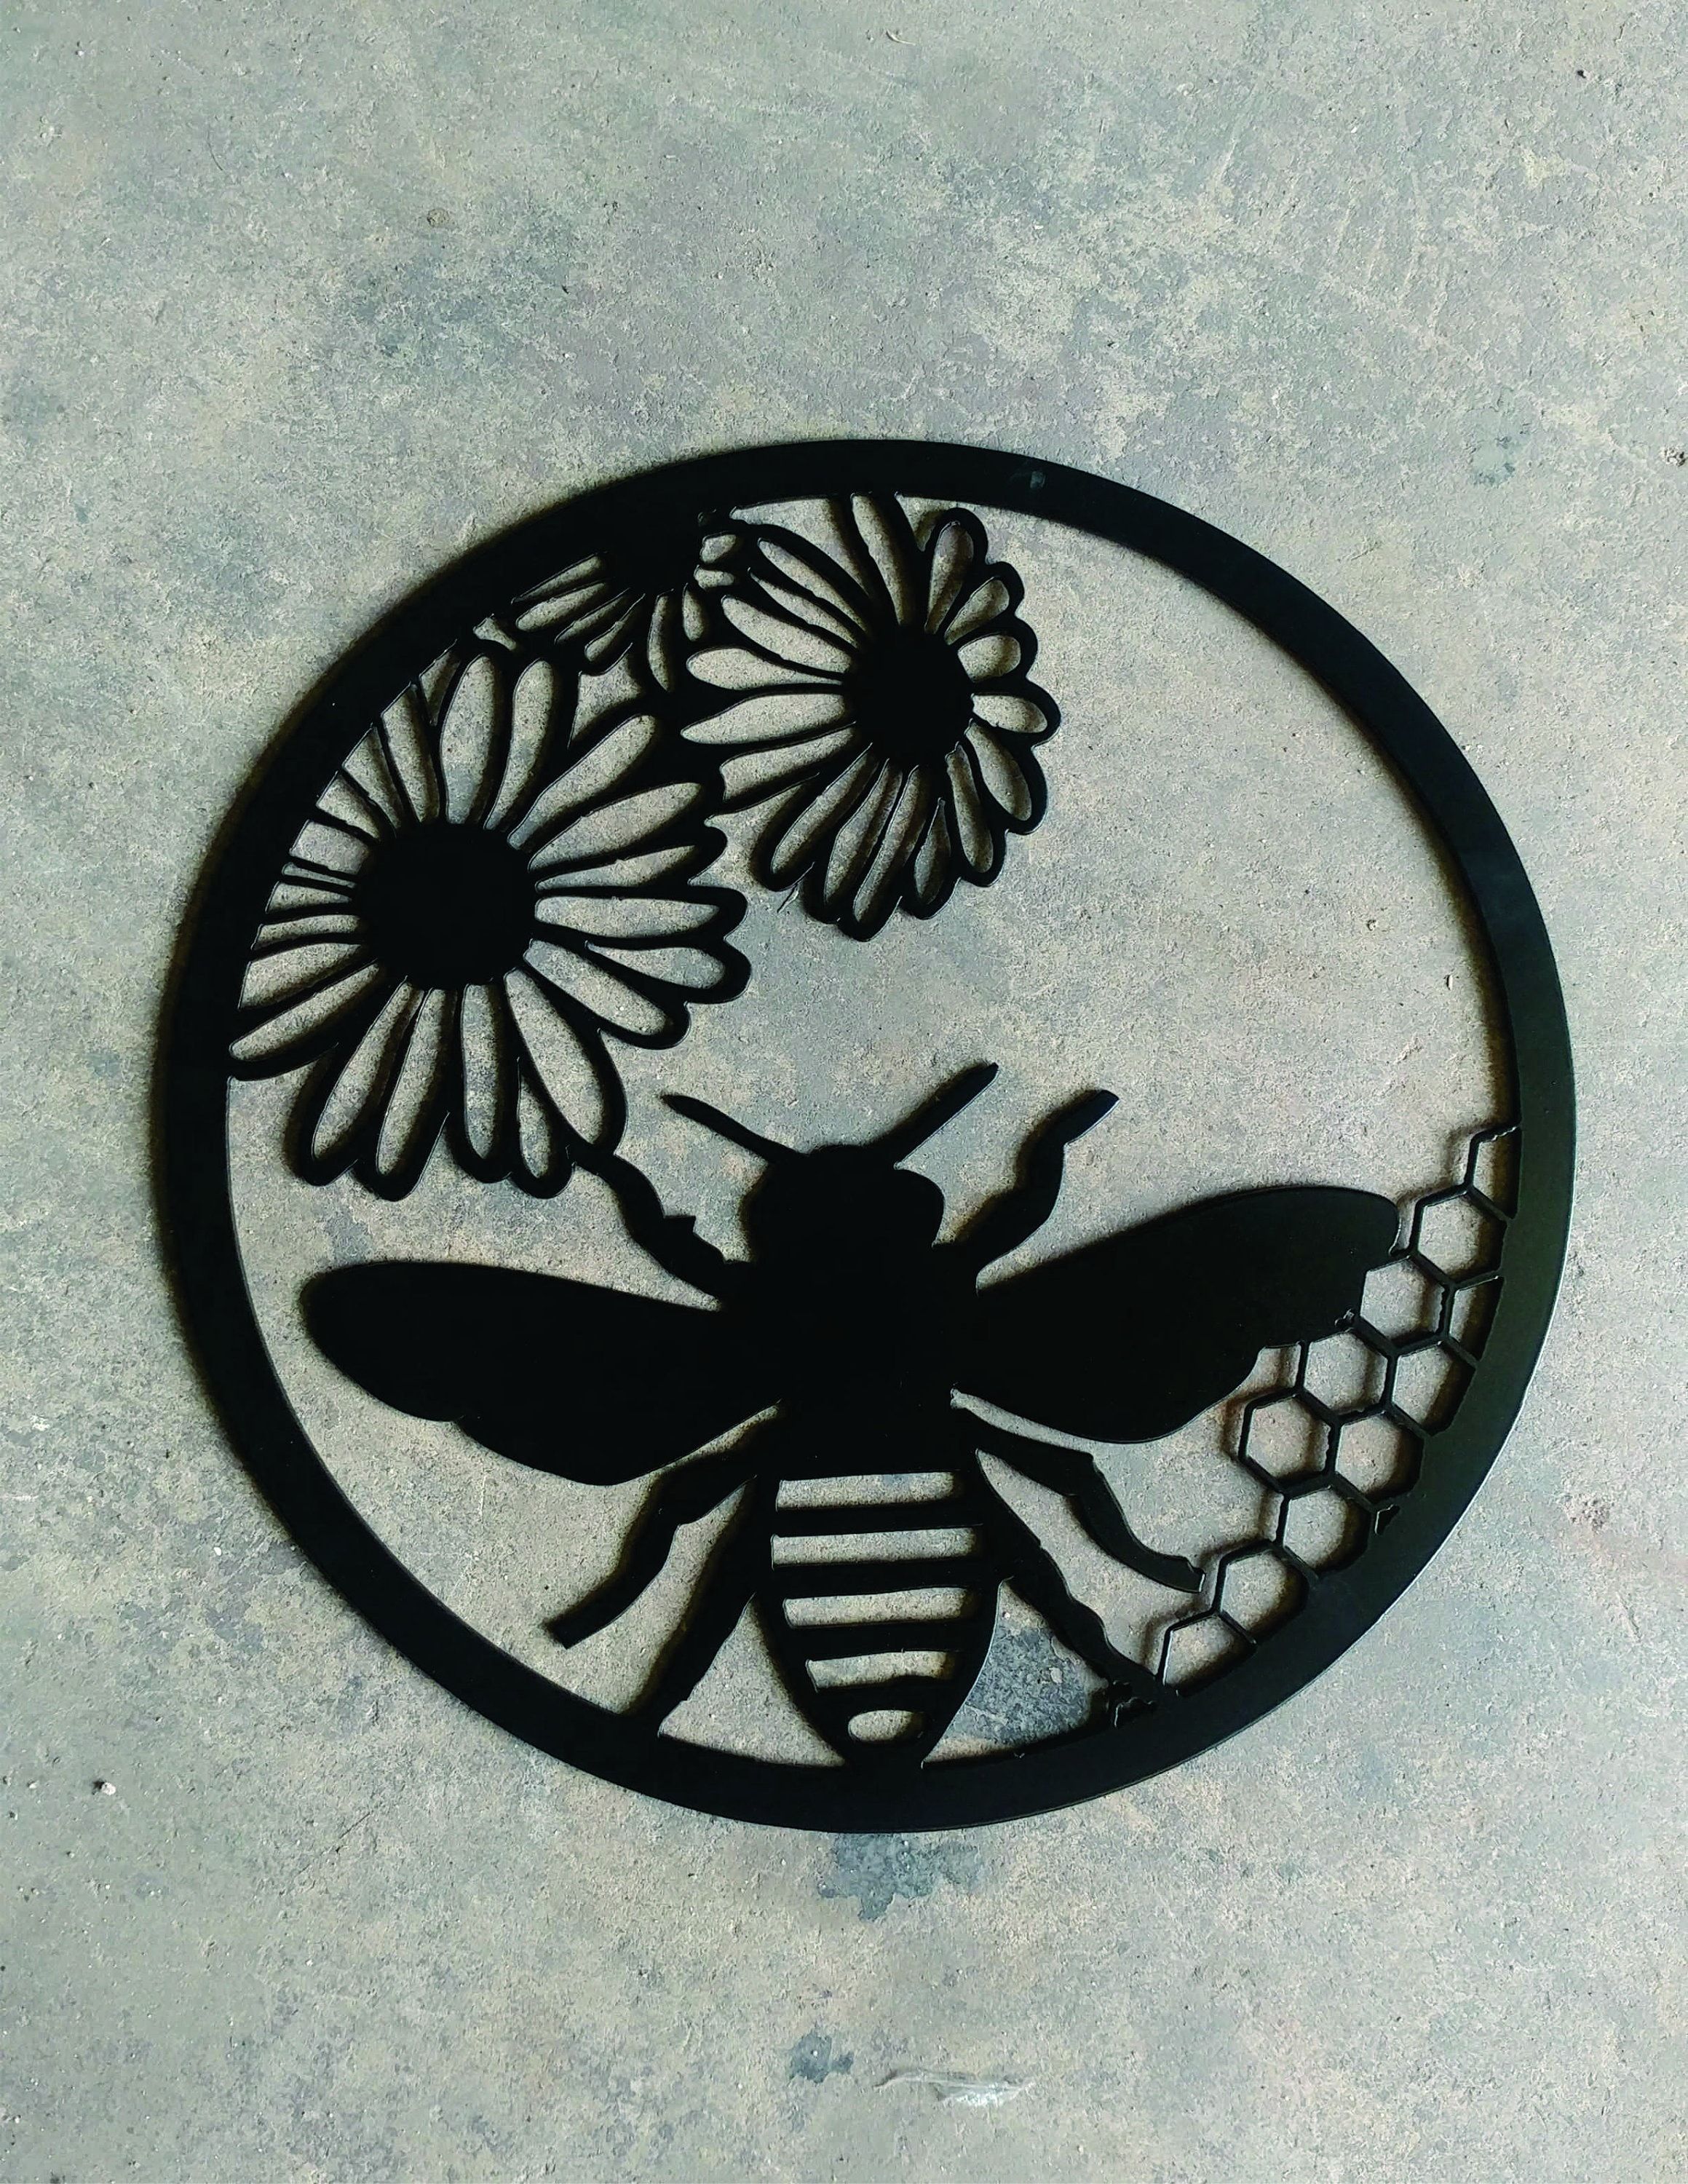 Honey Bee Wall Art Or Yard Stake. Plasma Cut Metal Sign Or – Etsy Within Current Metal Sign Stake Wall Art (Gallery 3 of 20)